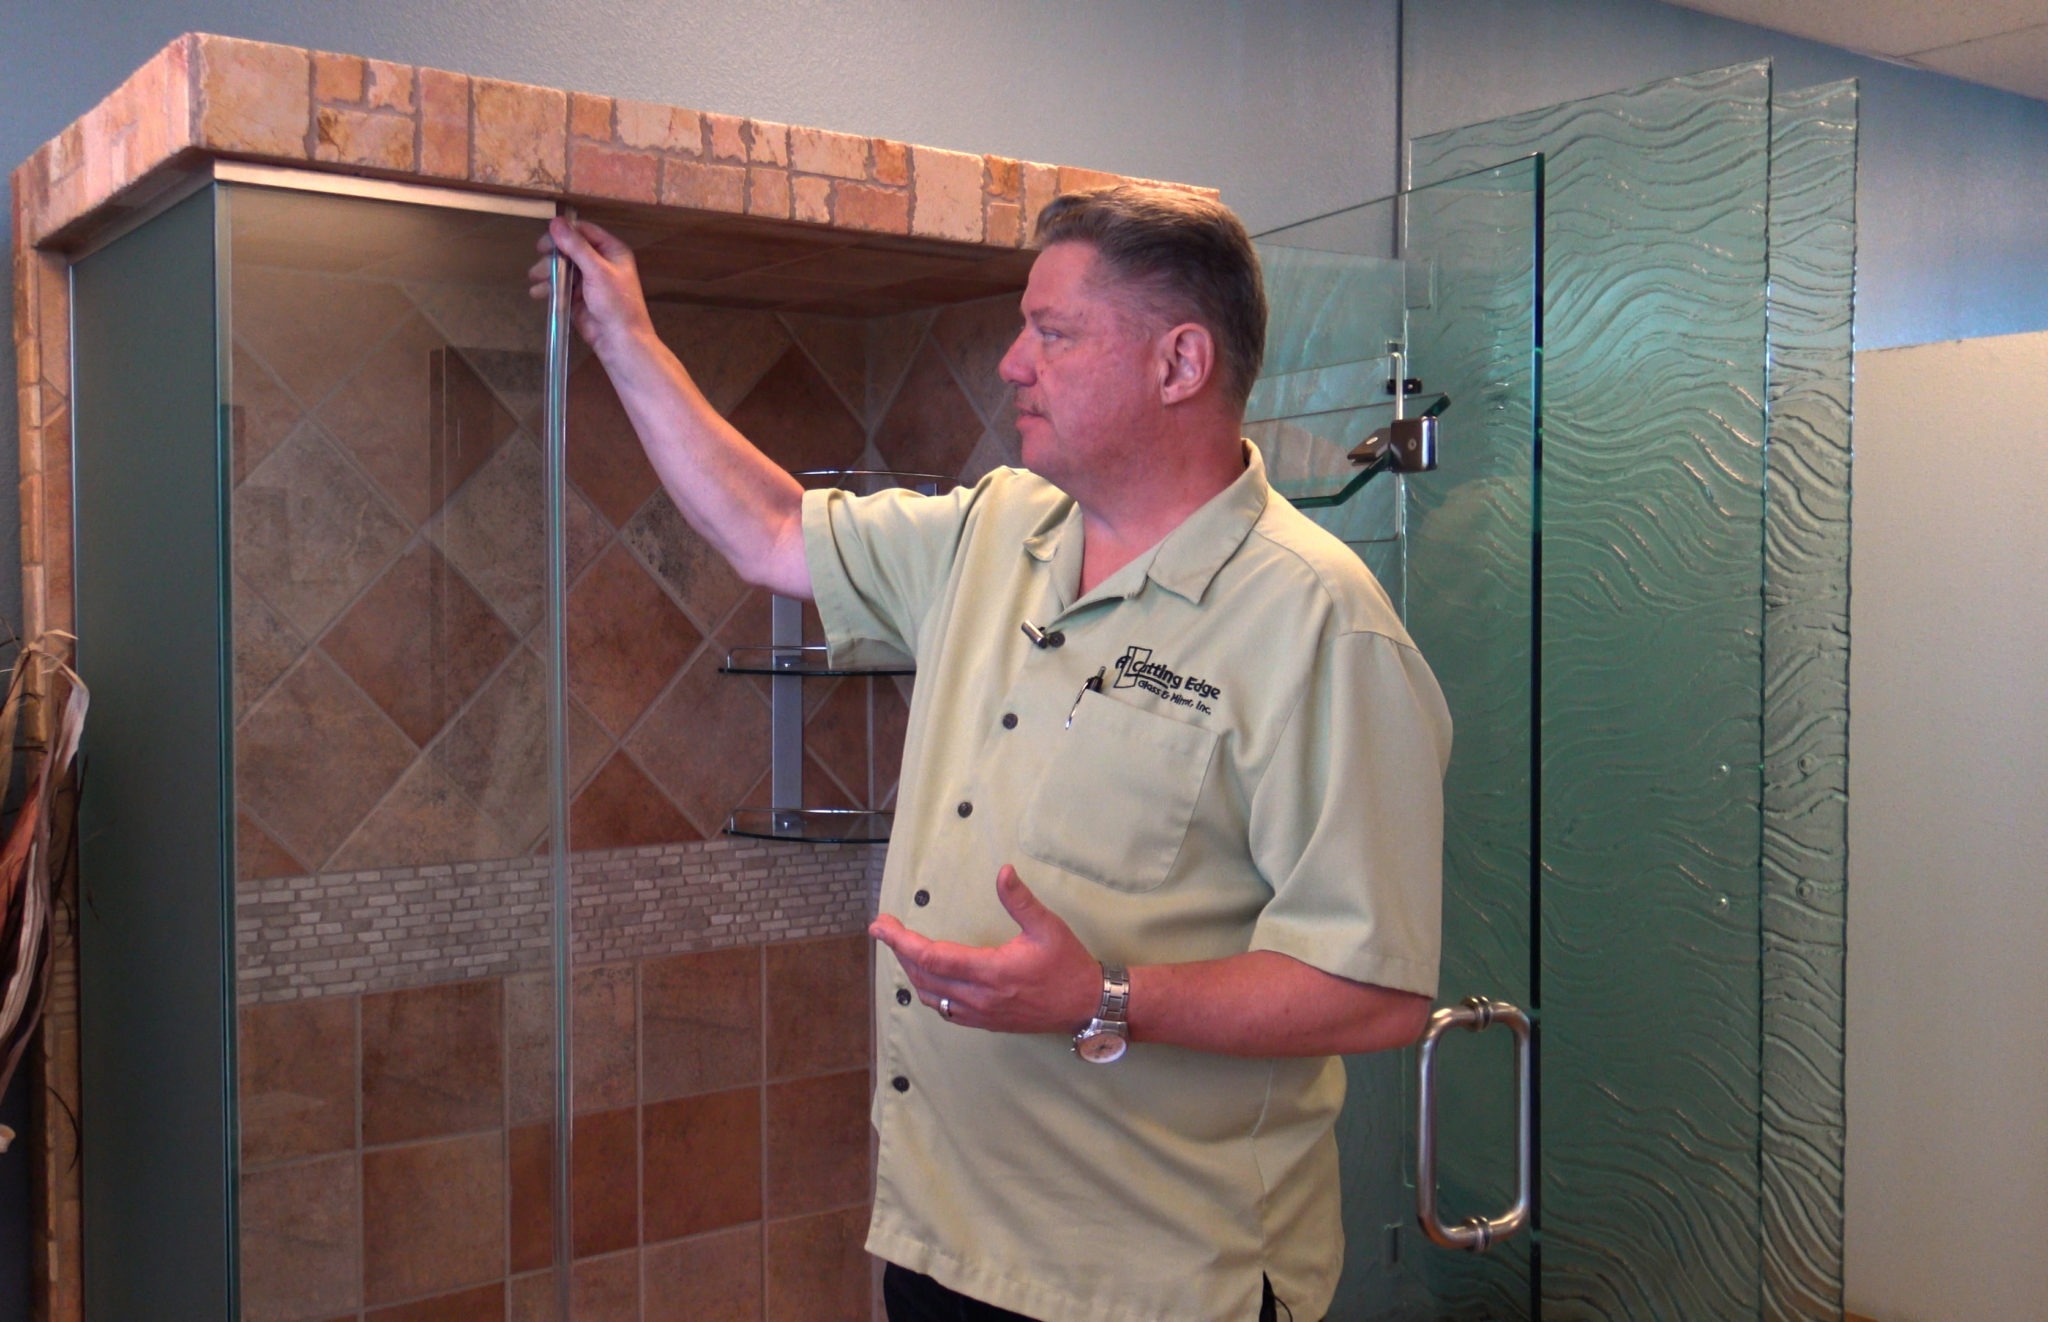 How To Replace Worn-Out Poly-Carbonate Shower Doors Strikes